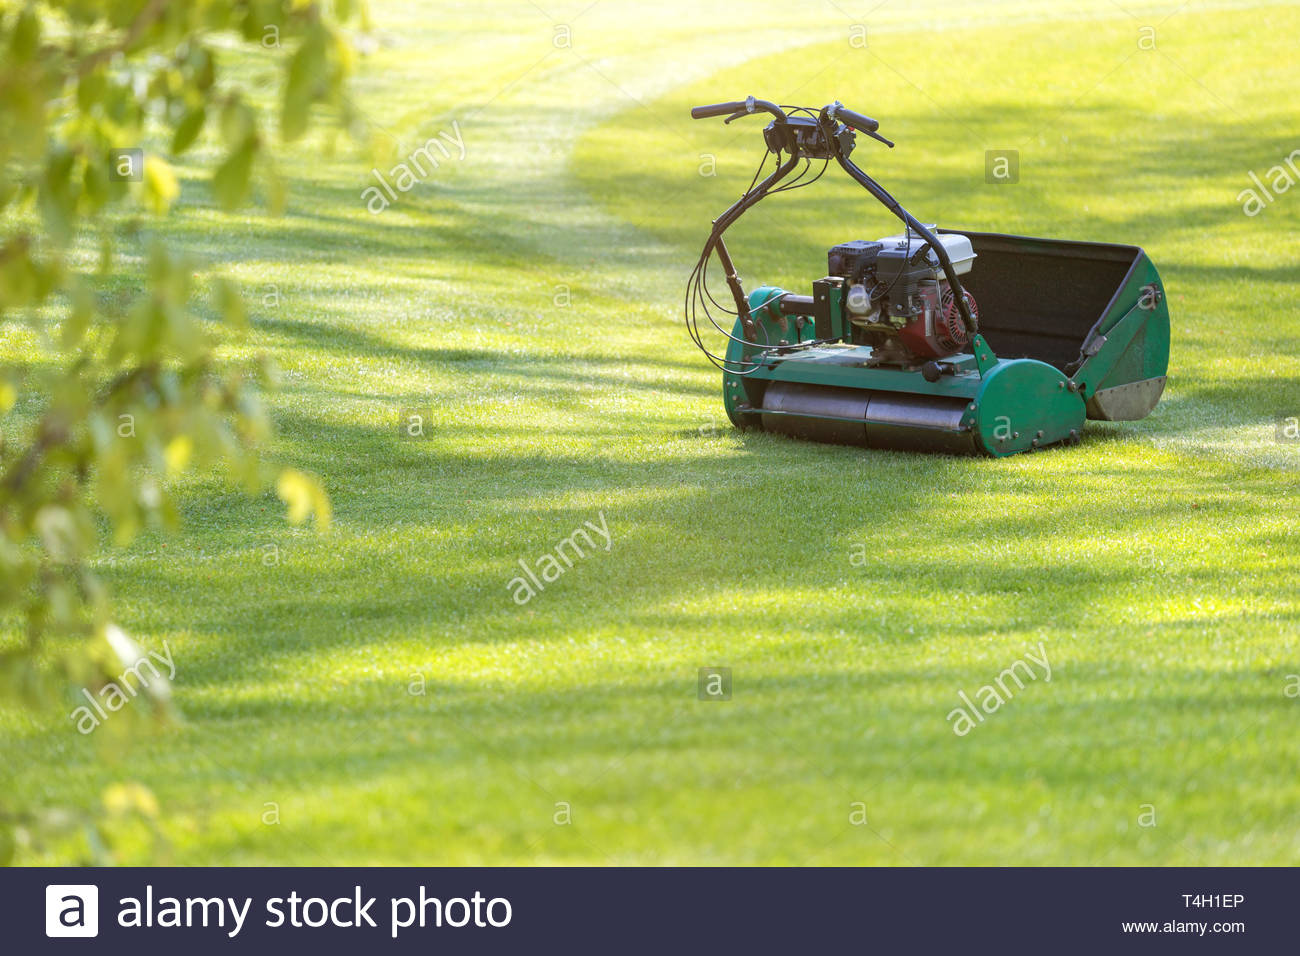 Lawn Mowing Background Stock Photo